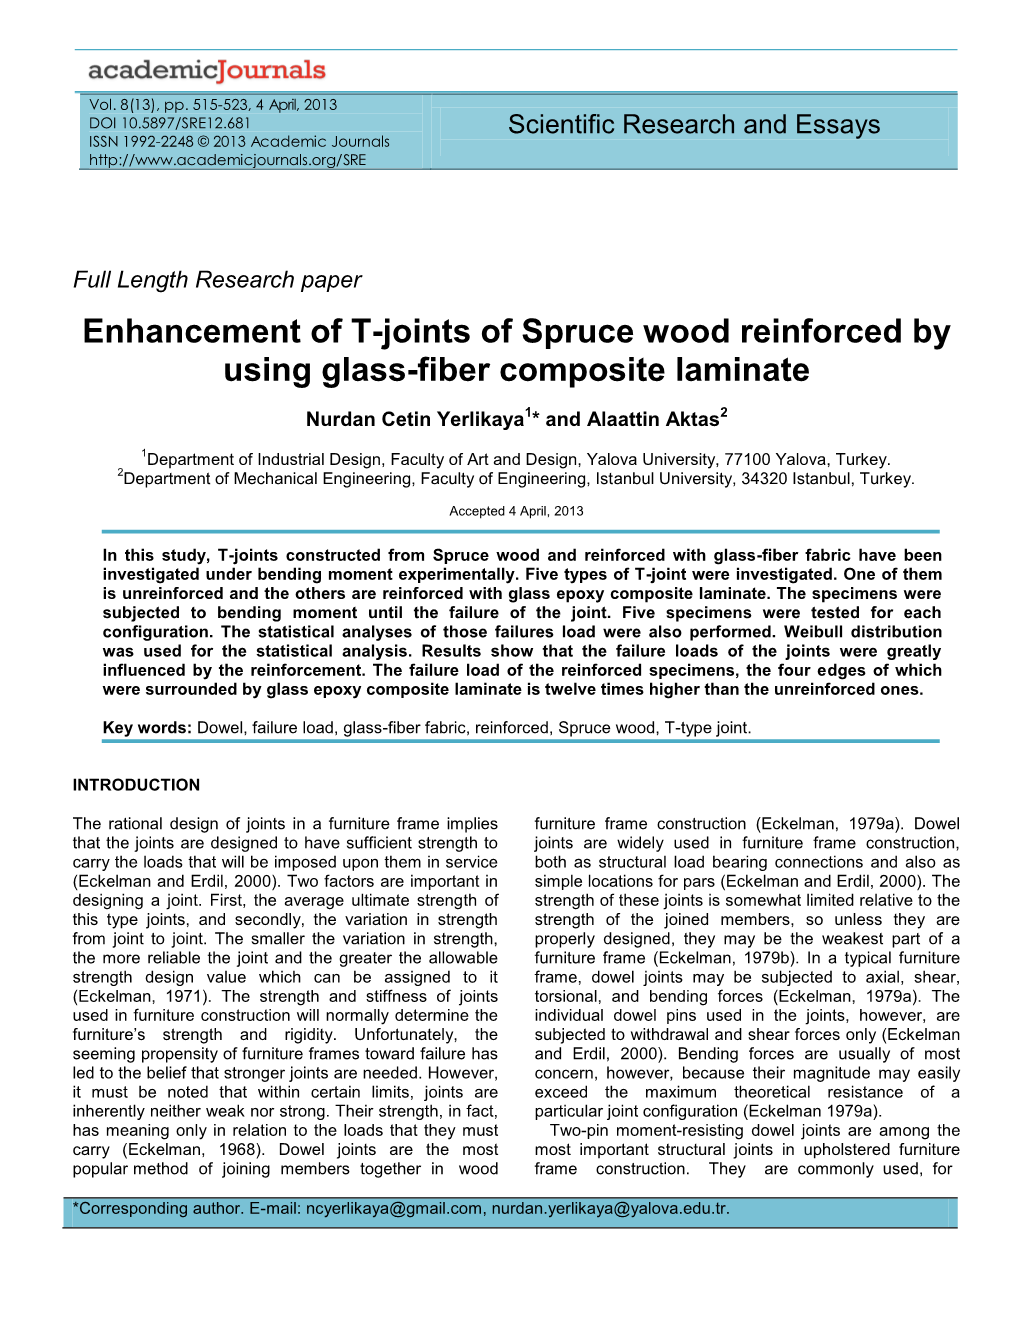 Enhancement of T-Joints of Spruce Wood Reinforced by Using Glass-Fiber Composite Laminate